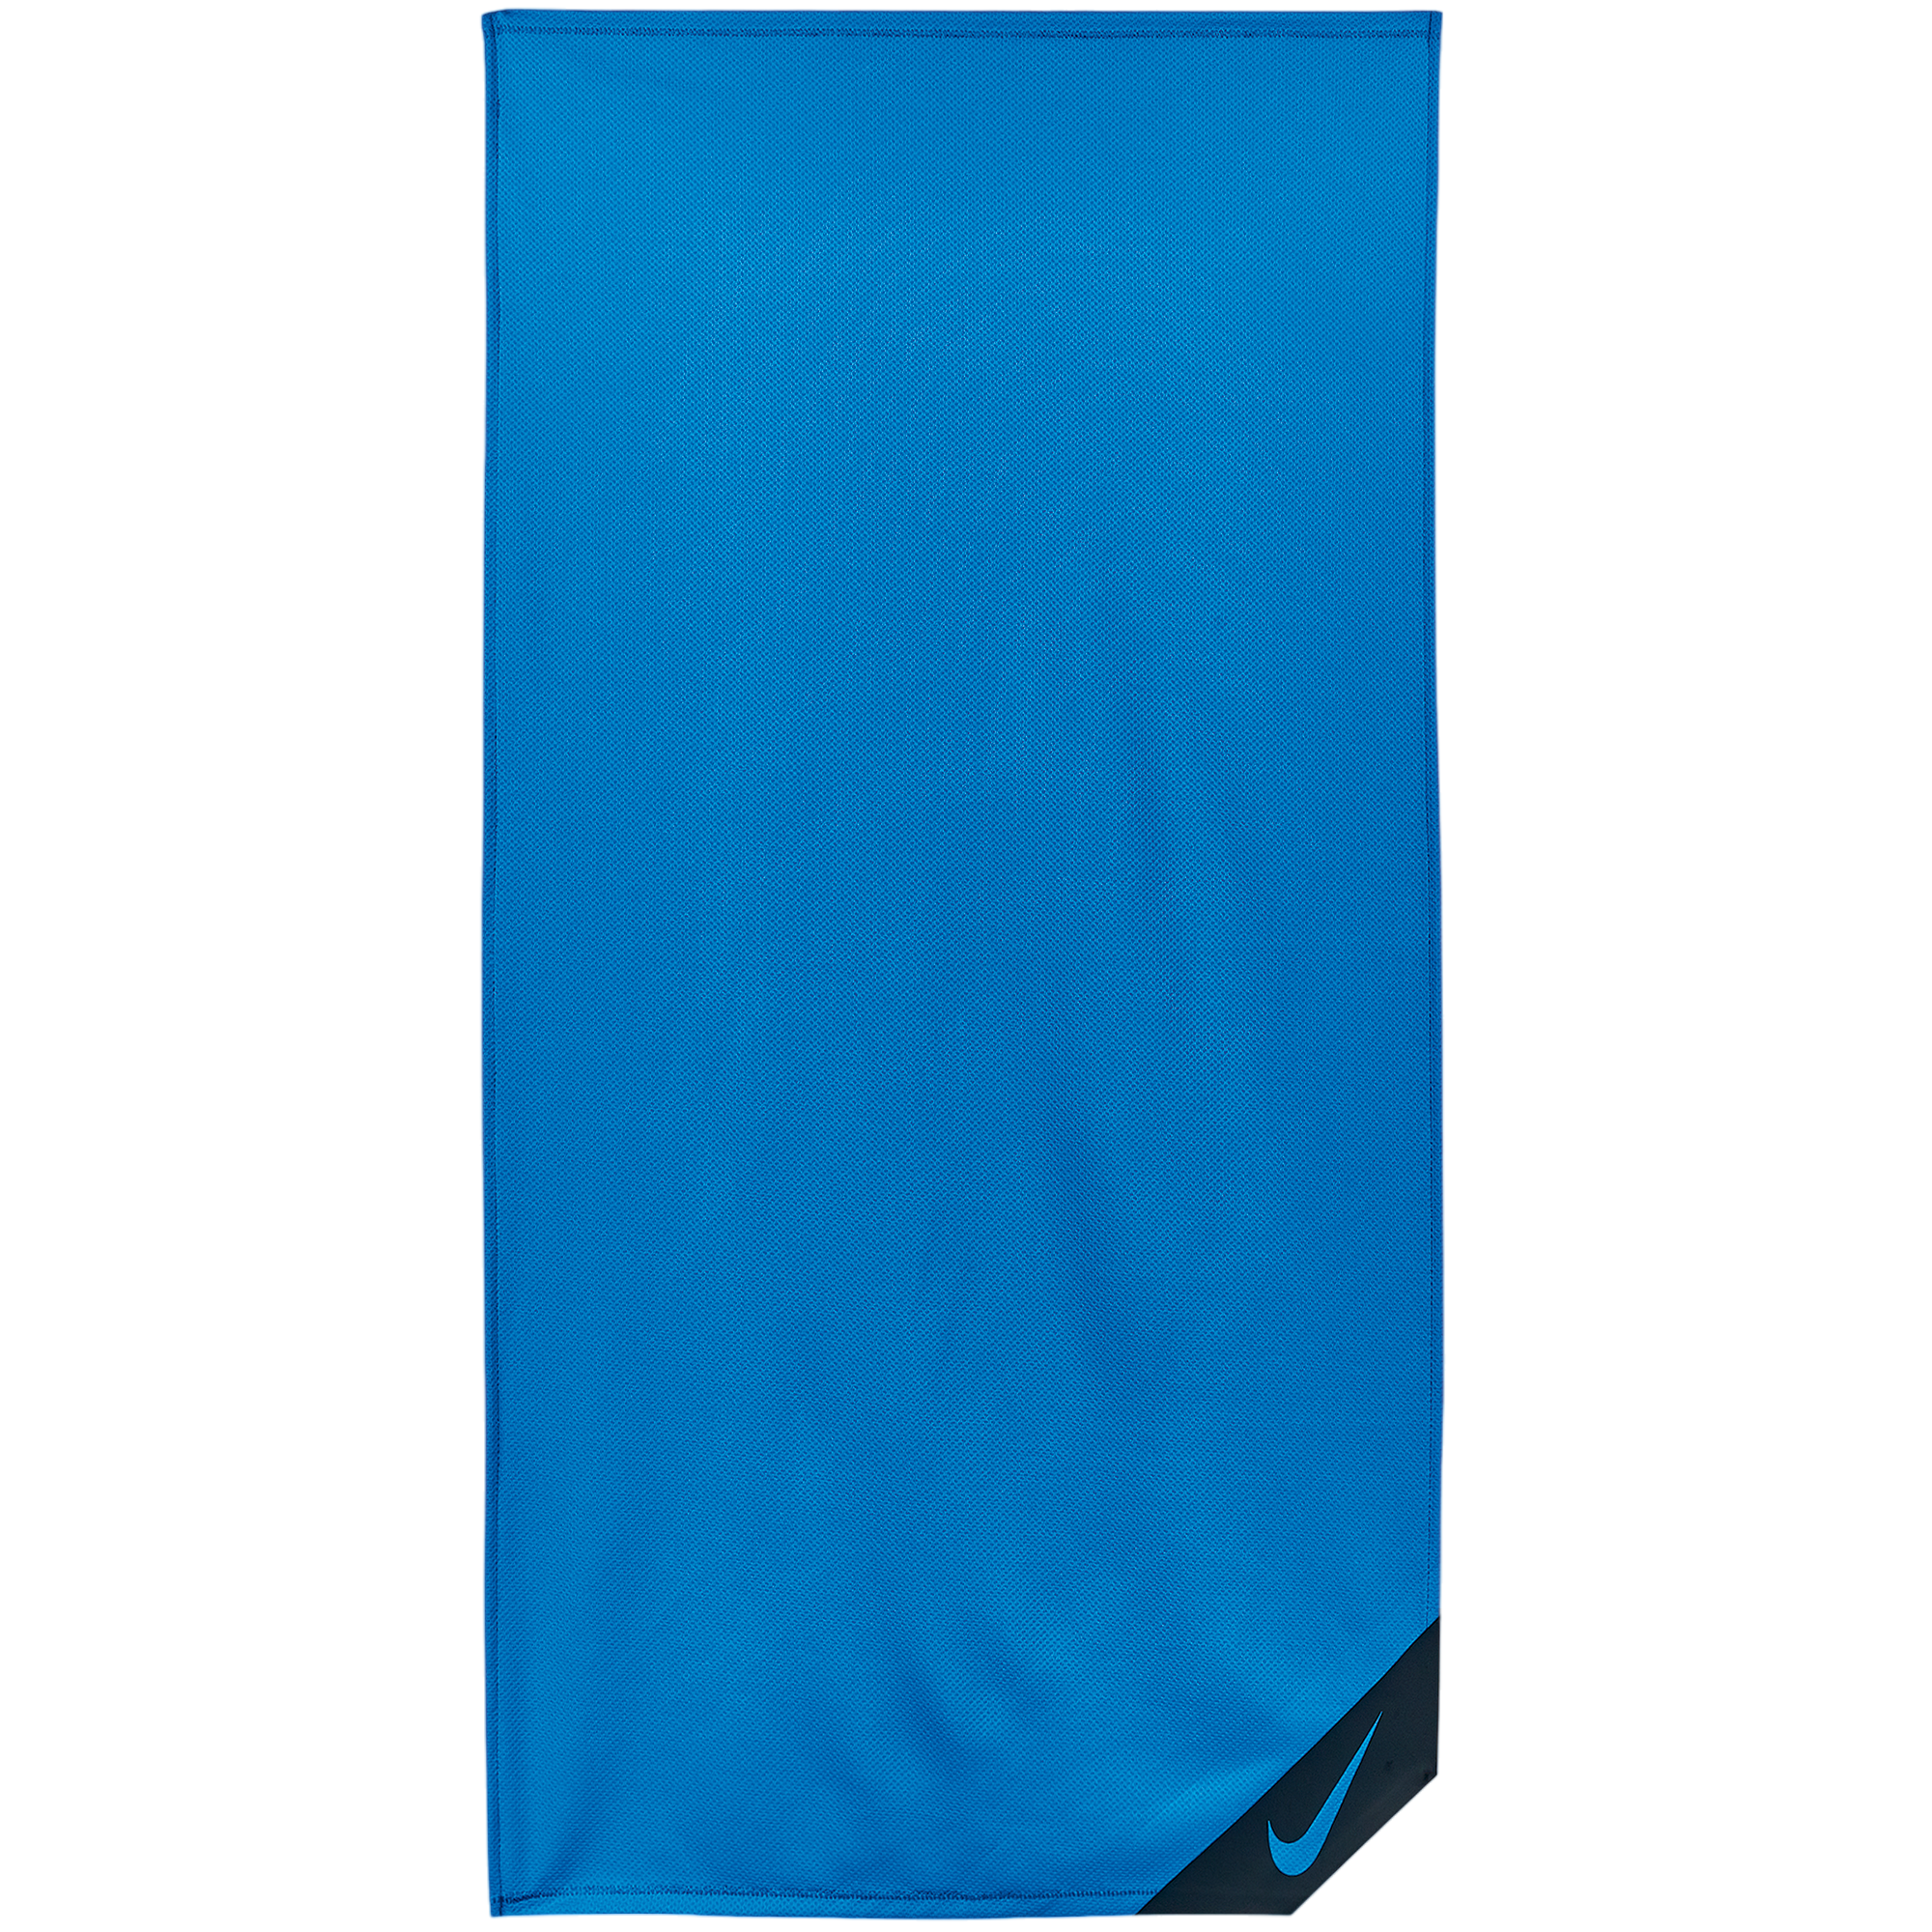 Cooling Towel - Small